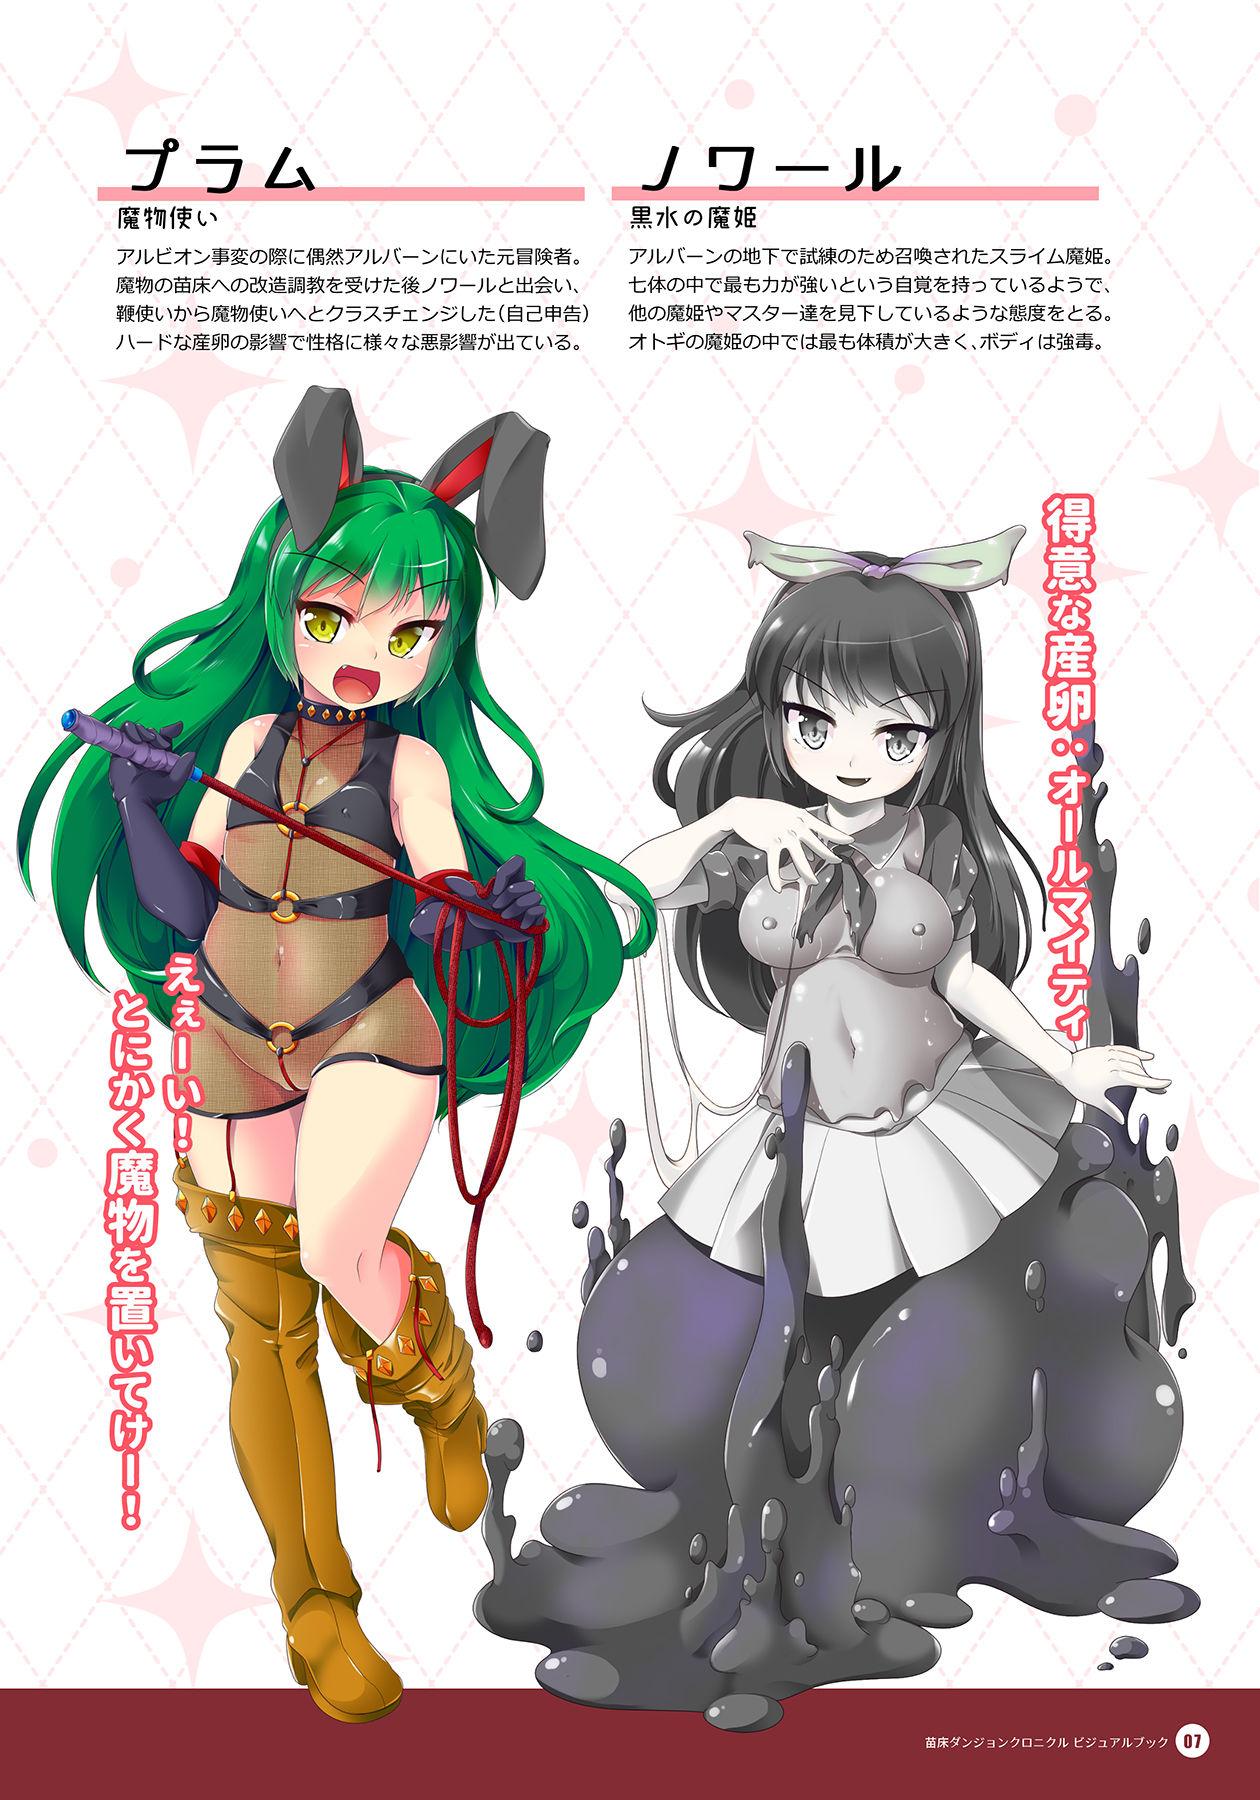 Naedoko Dungeon Chronicle Official Design Works 5